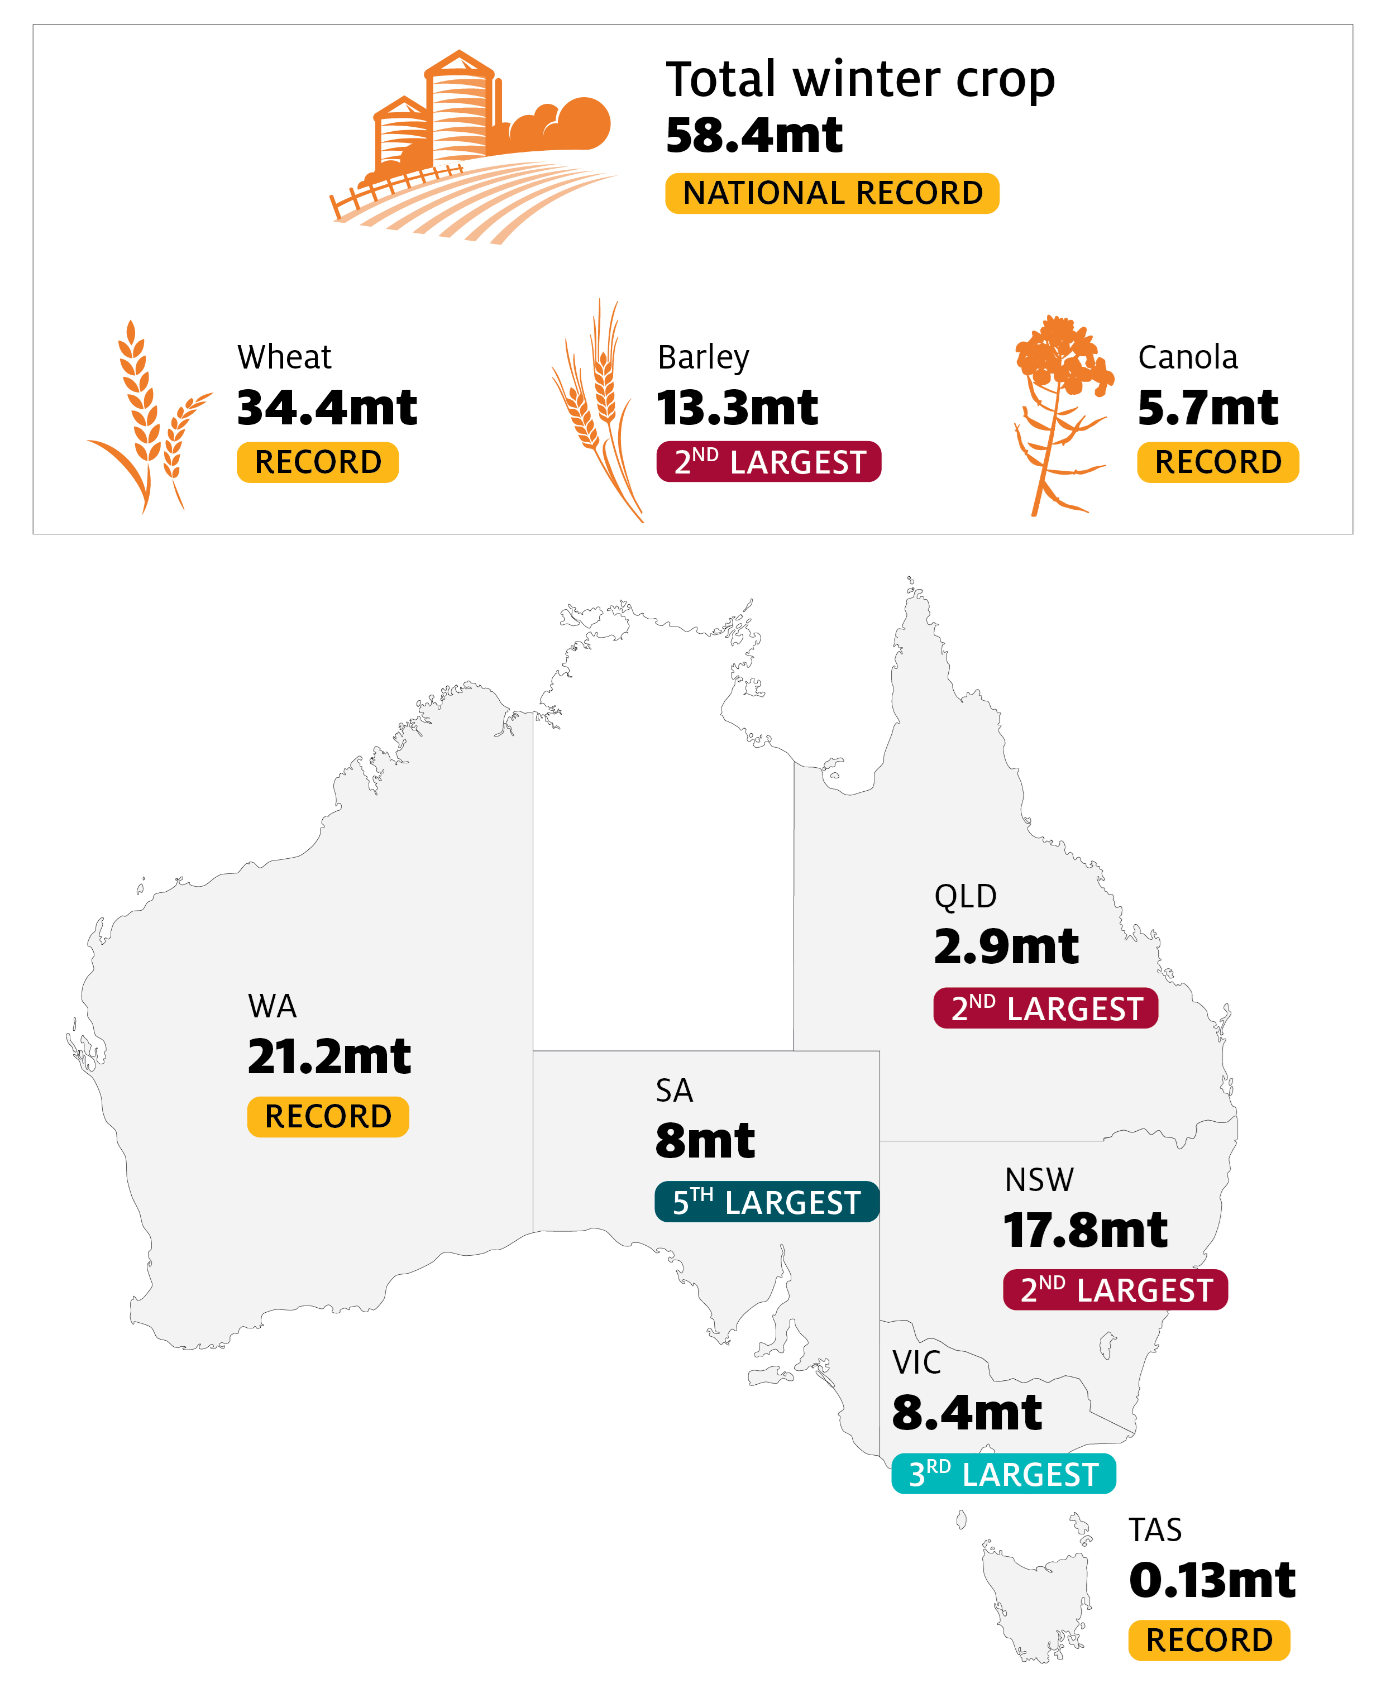 The record and near record crop totals on an Australian map.